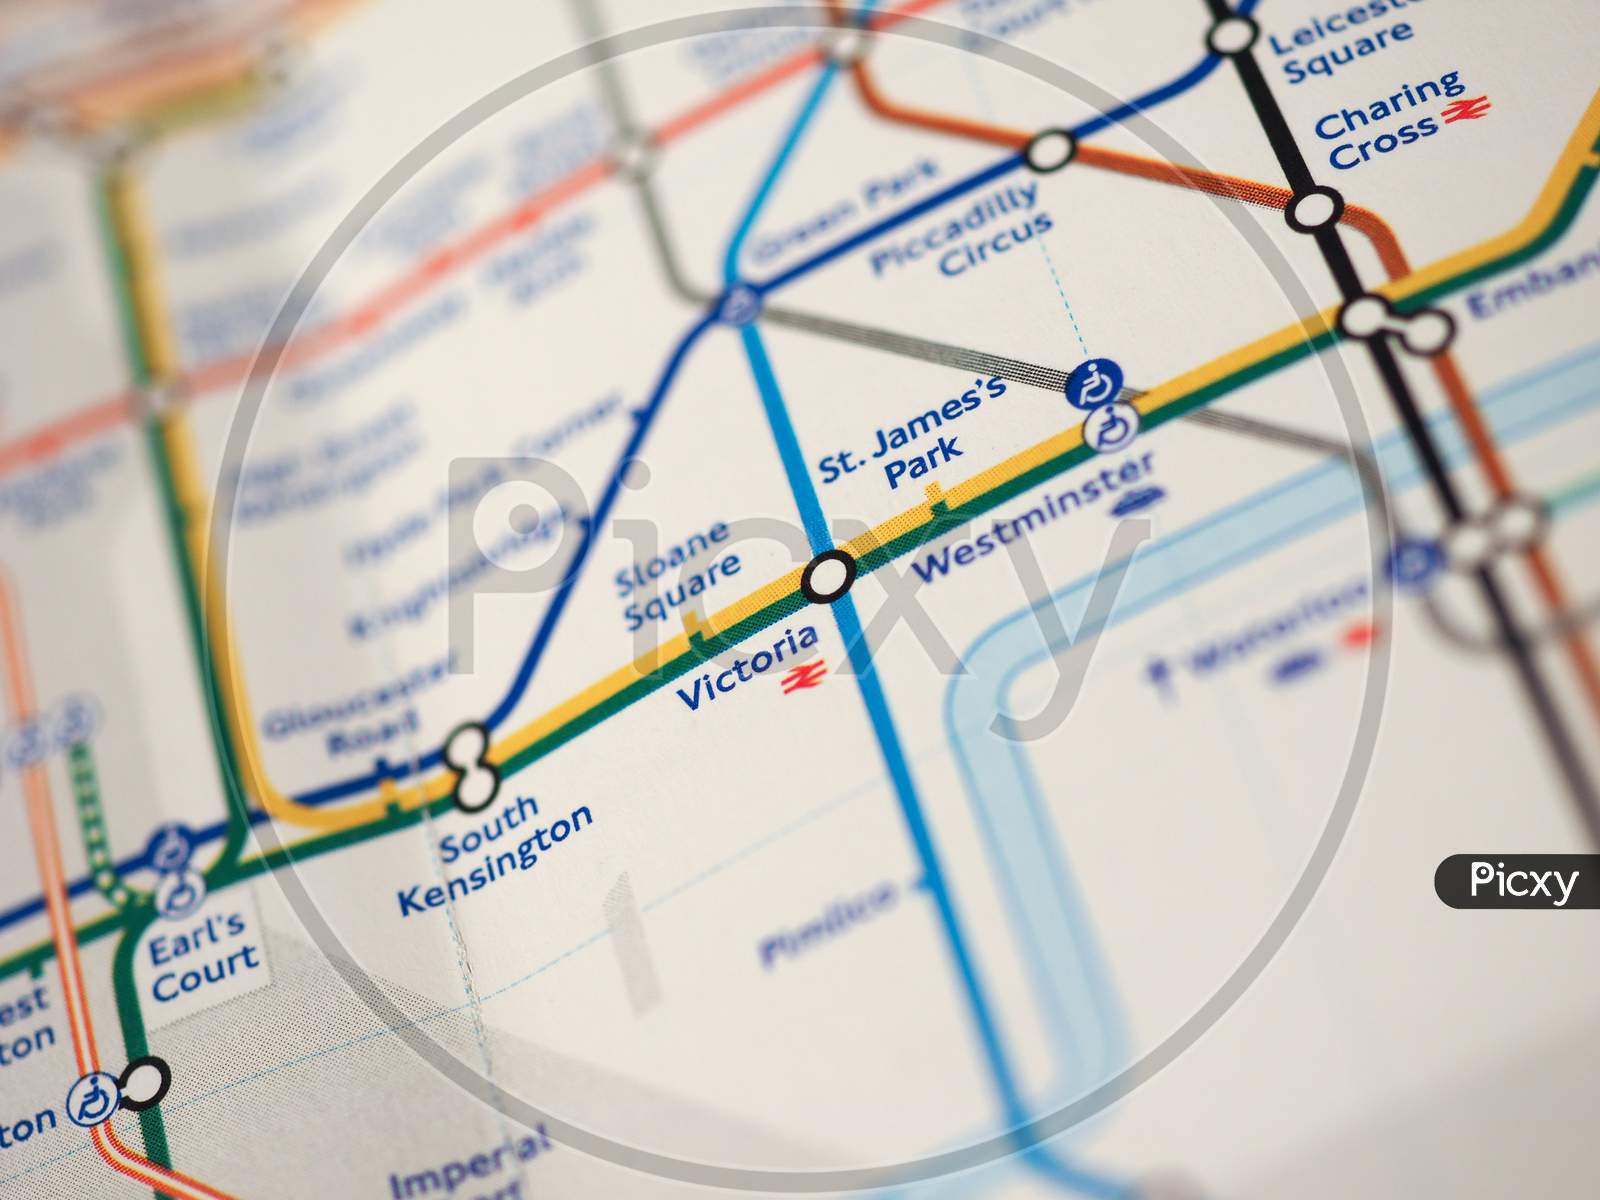 London, Uk - Circa 2018: Map Of London Underground Tube Stations With Selective Focus On Victoria Station